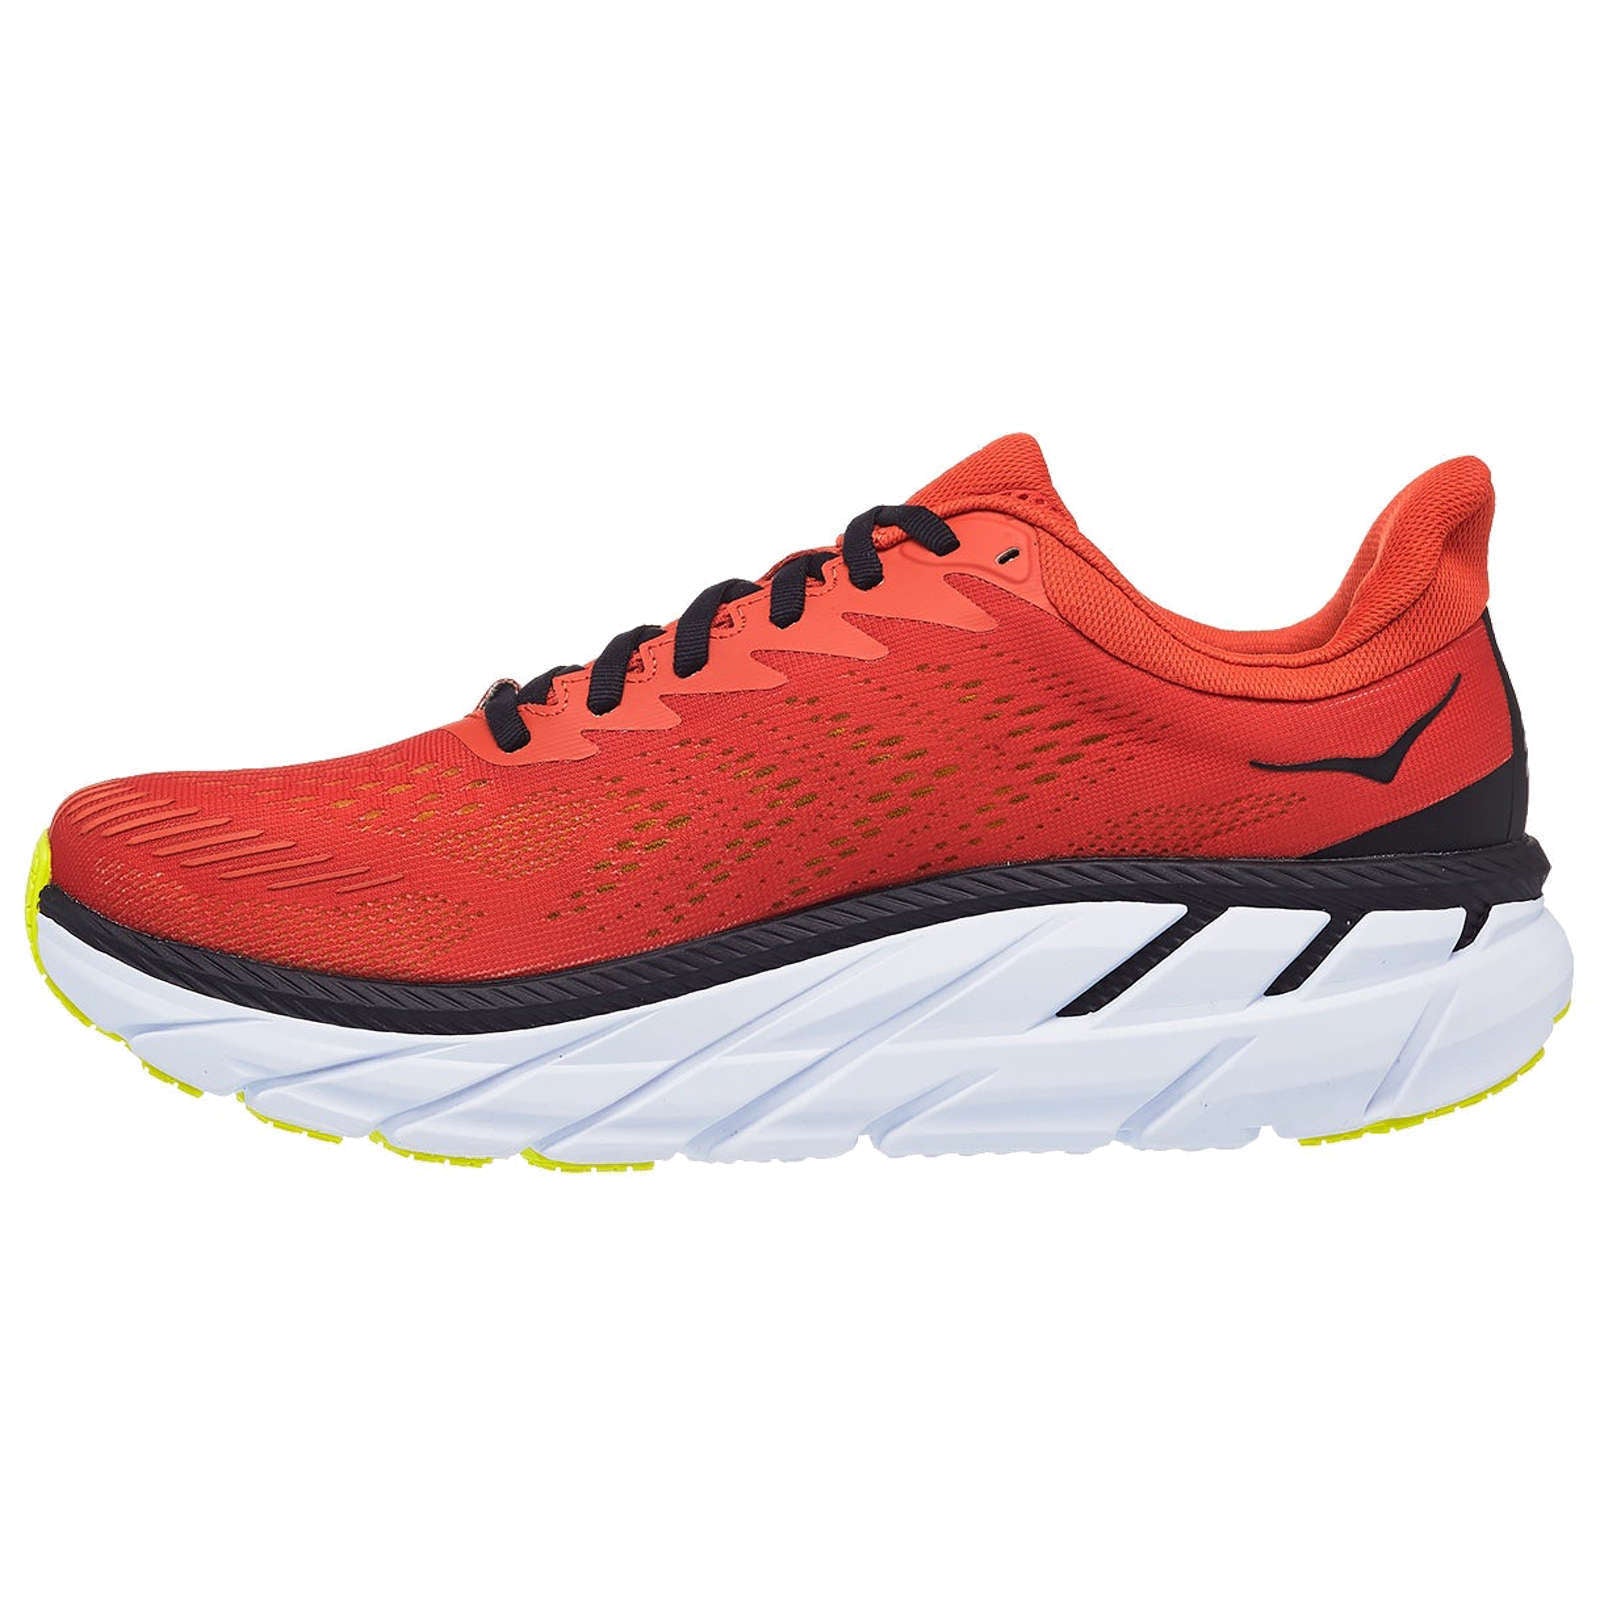 Hoka One One Clifton 7 Mesh Men's Low-Top Road Running Trainers#color_chili black